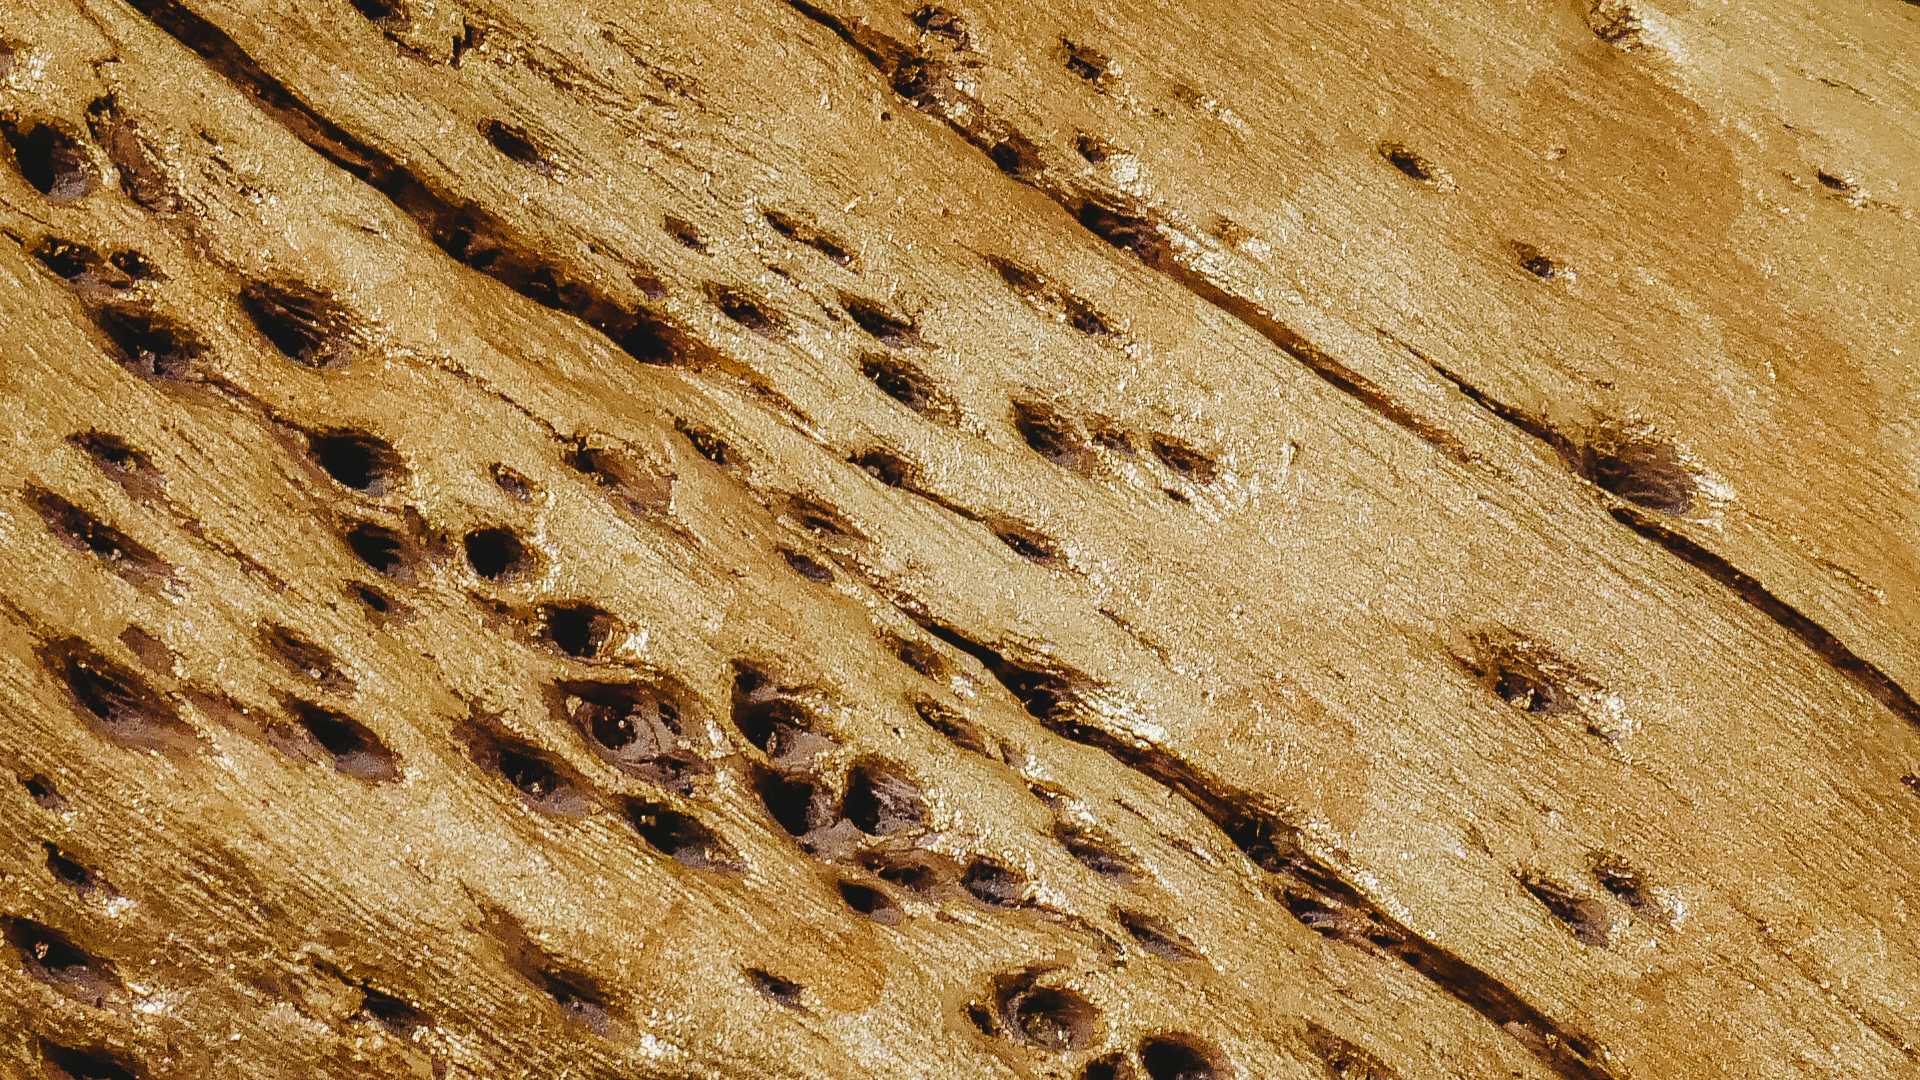 Termite holes in a piece of wood